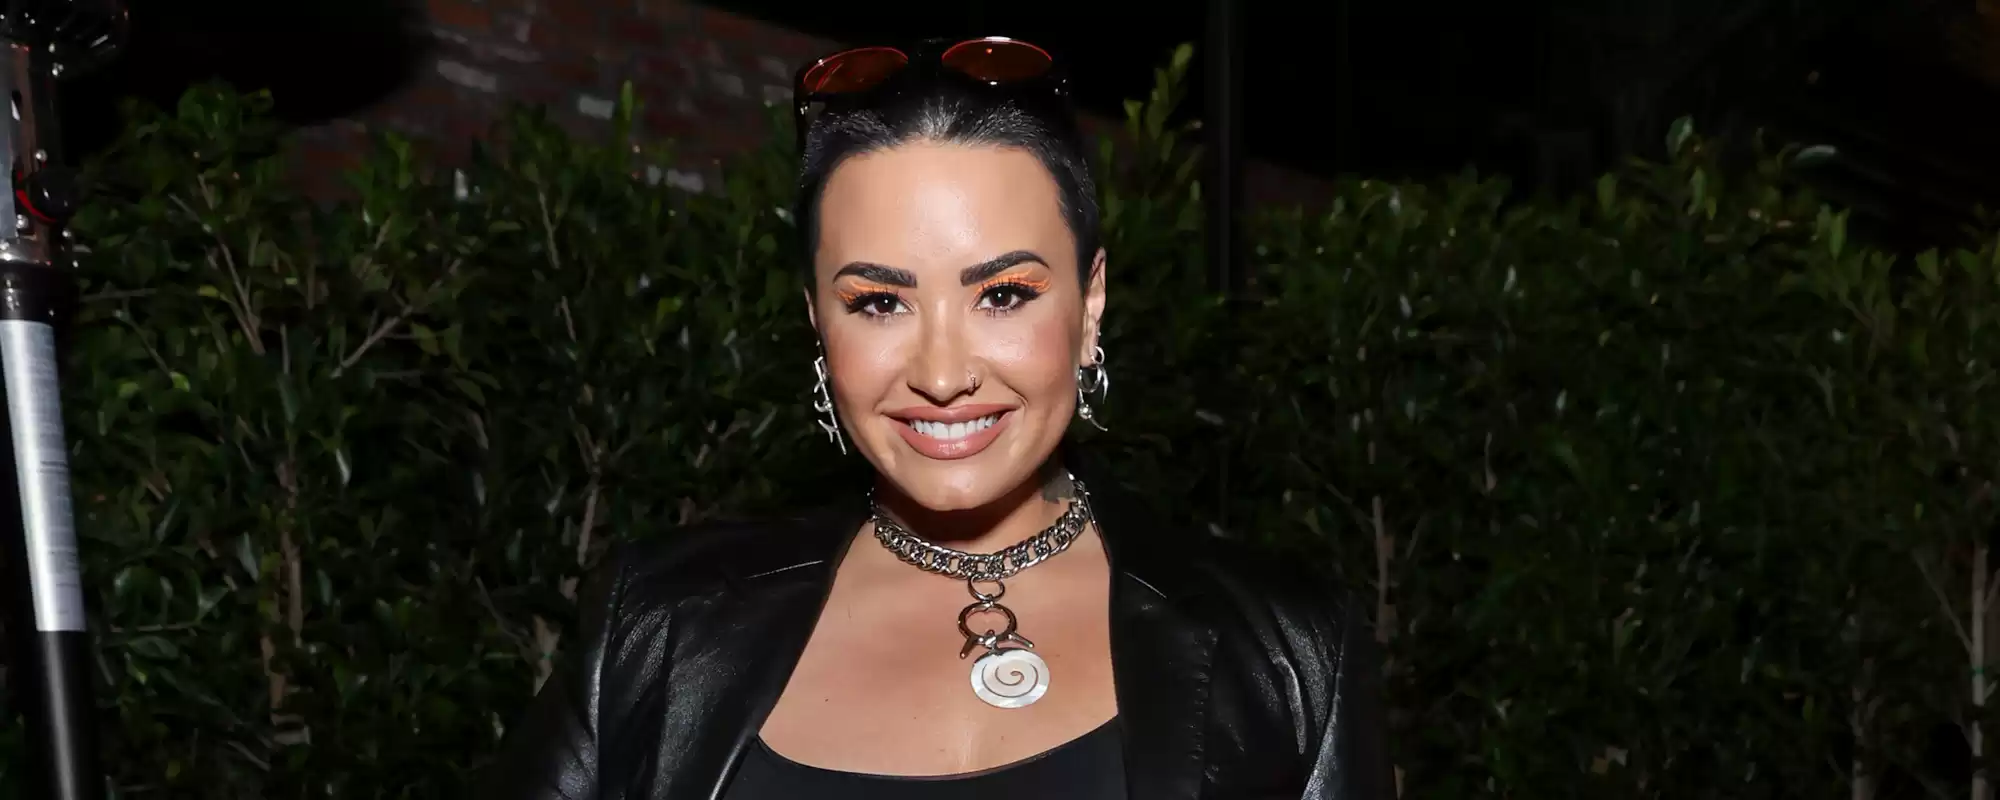 Demi Lovato Electrifies Fourth of July Fireworks with an Energetic Performance of 